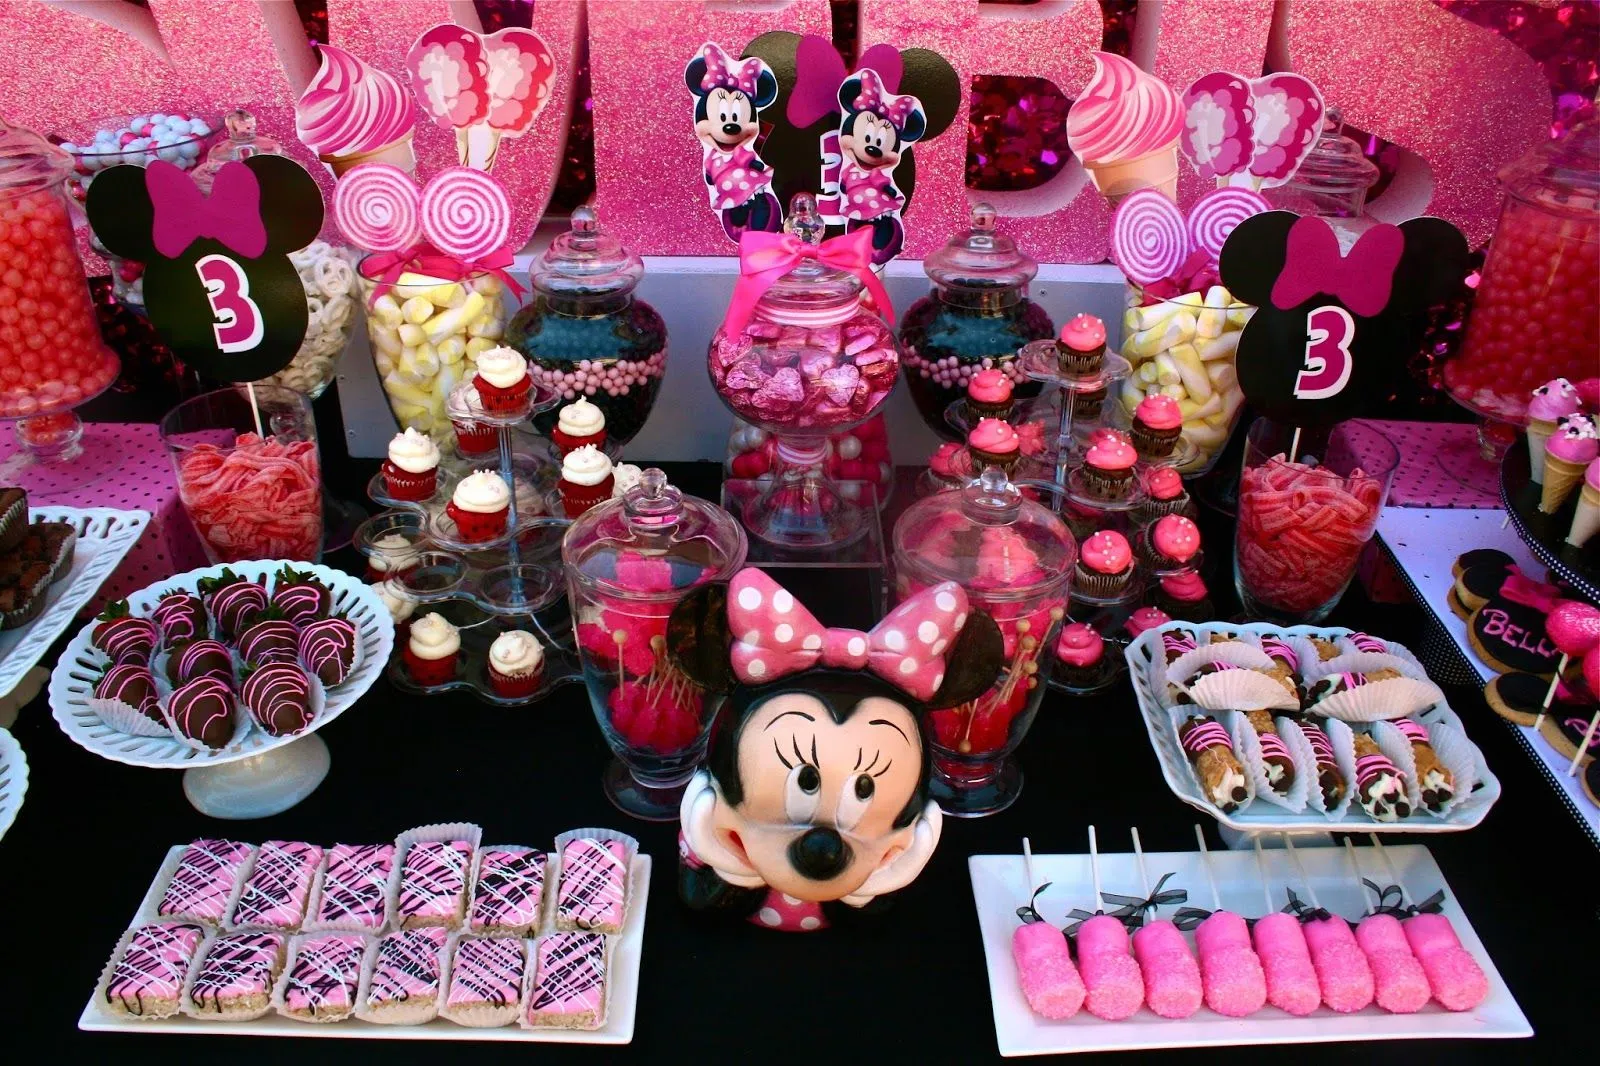 Hollywood Candy Girls Crazy Candy World Blog! tagged "minnie mouse ...